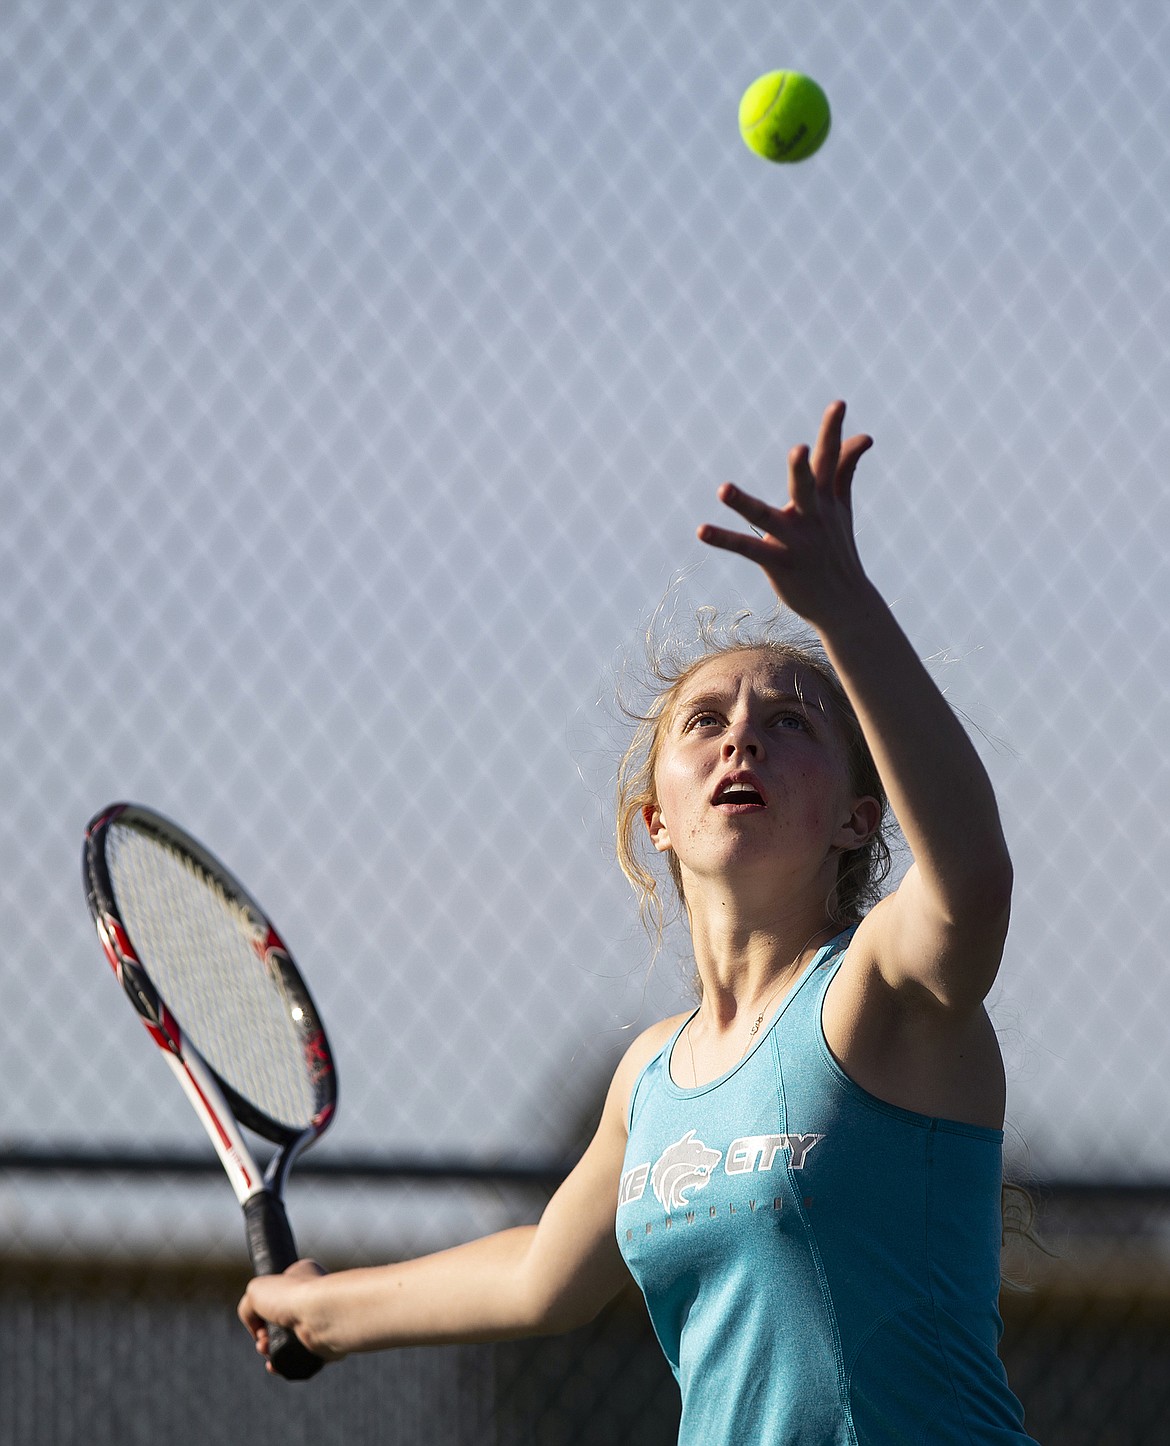 Lake City High&#146;s Kiki Cates serves to Coeur d&#146;Alene&#146;s Rachel Jeske in the No. 2 girls singles match Wednesday afternoon at Coeur d&#146;Alene High.